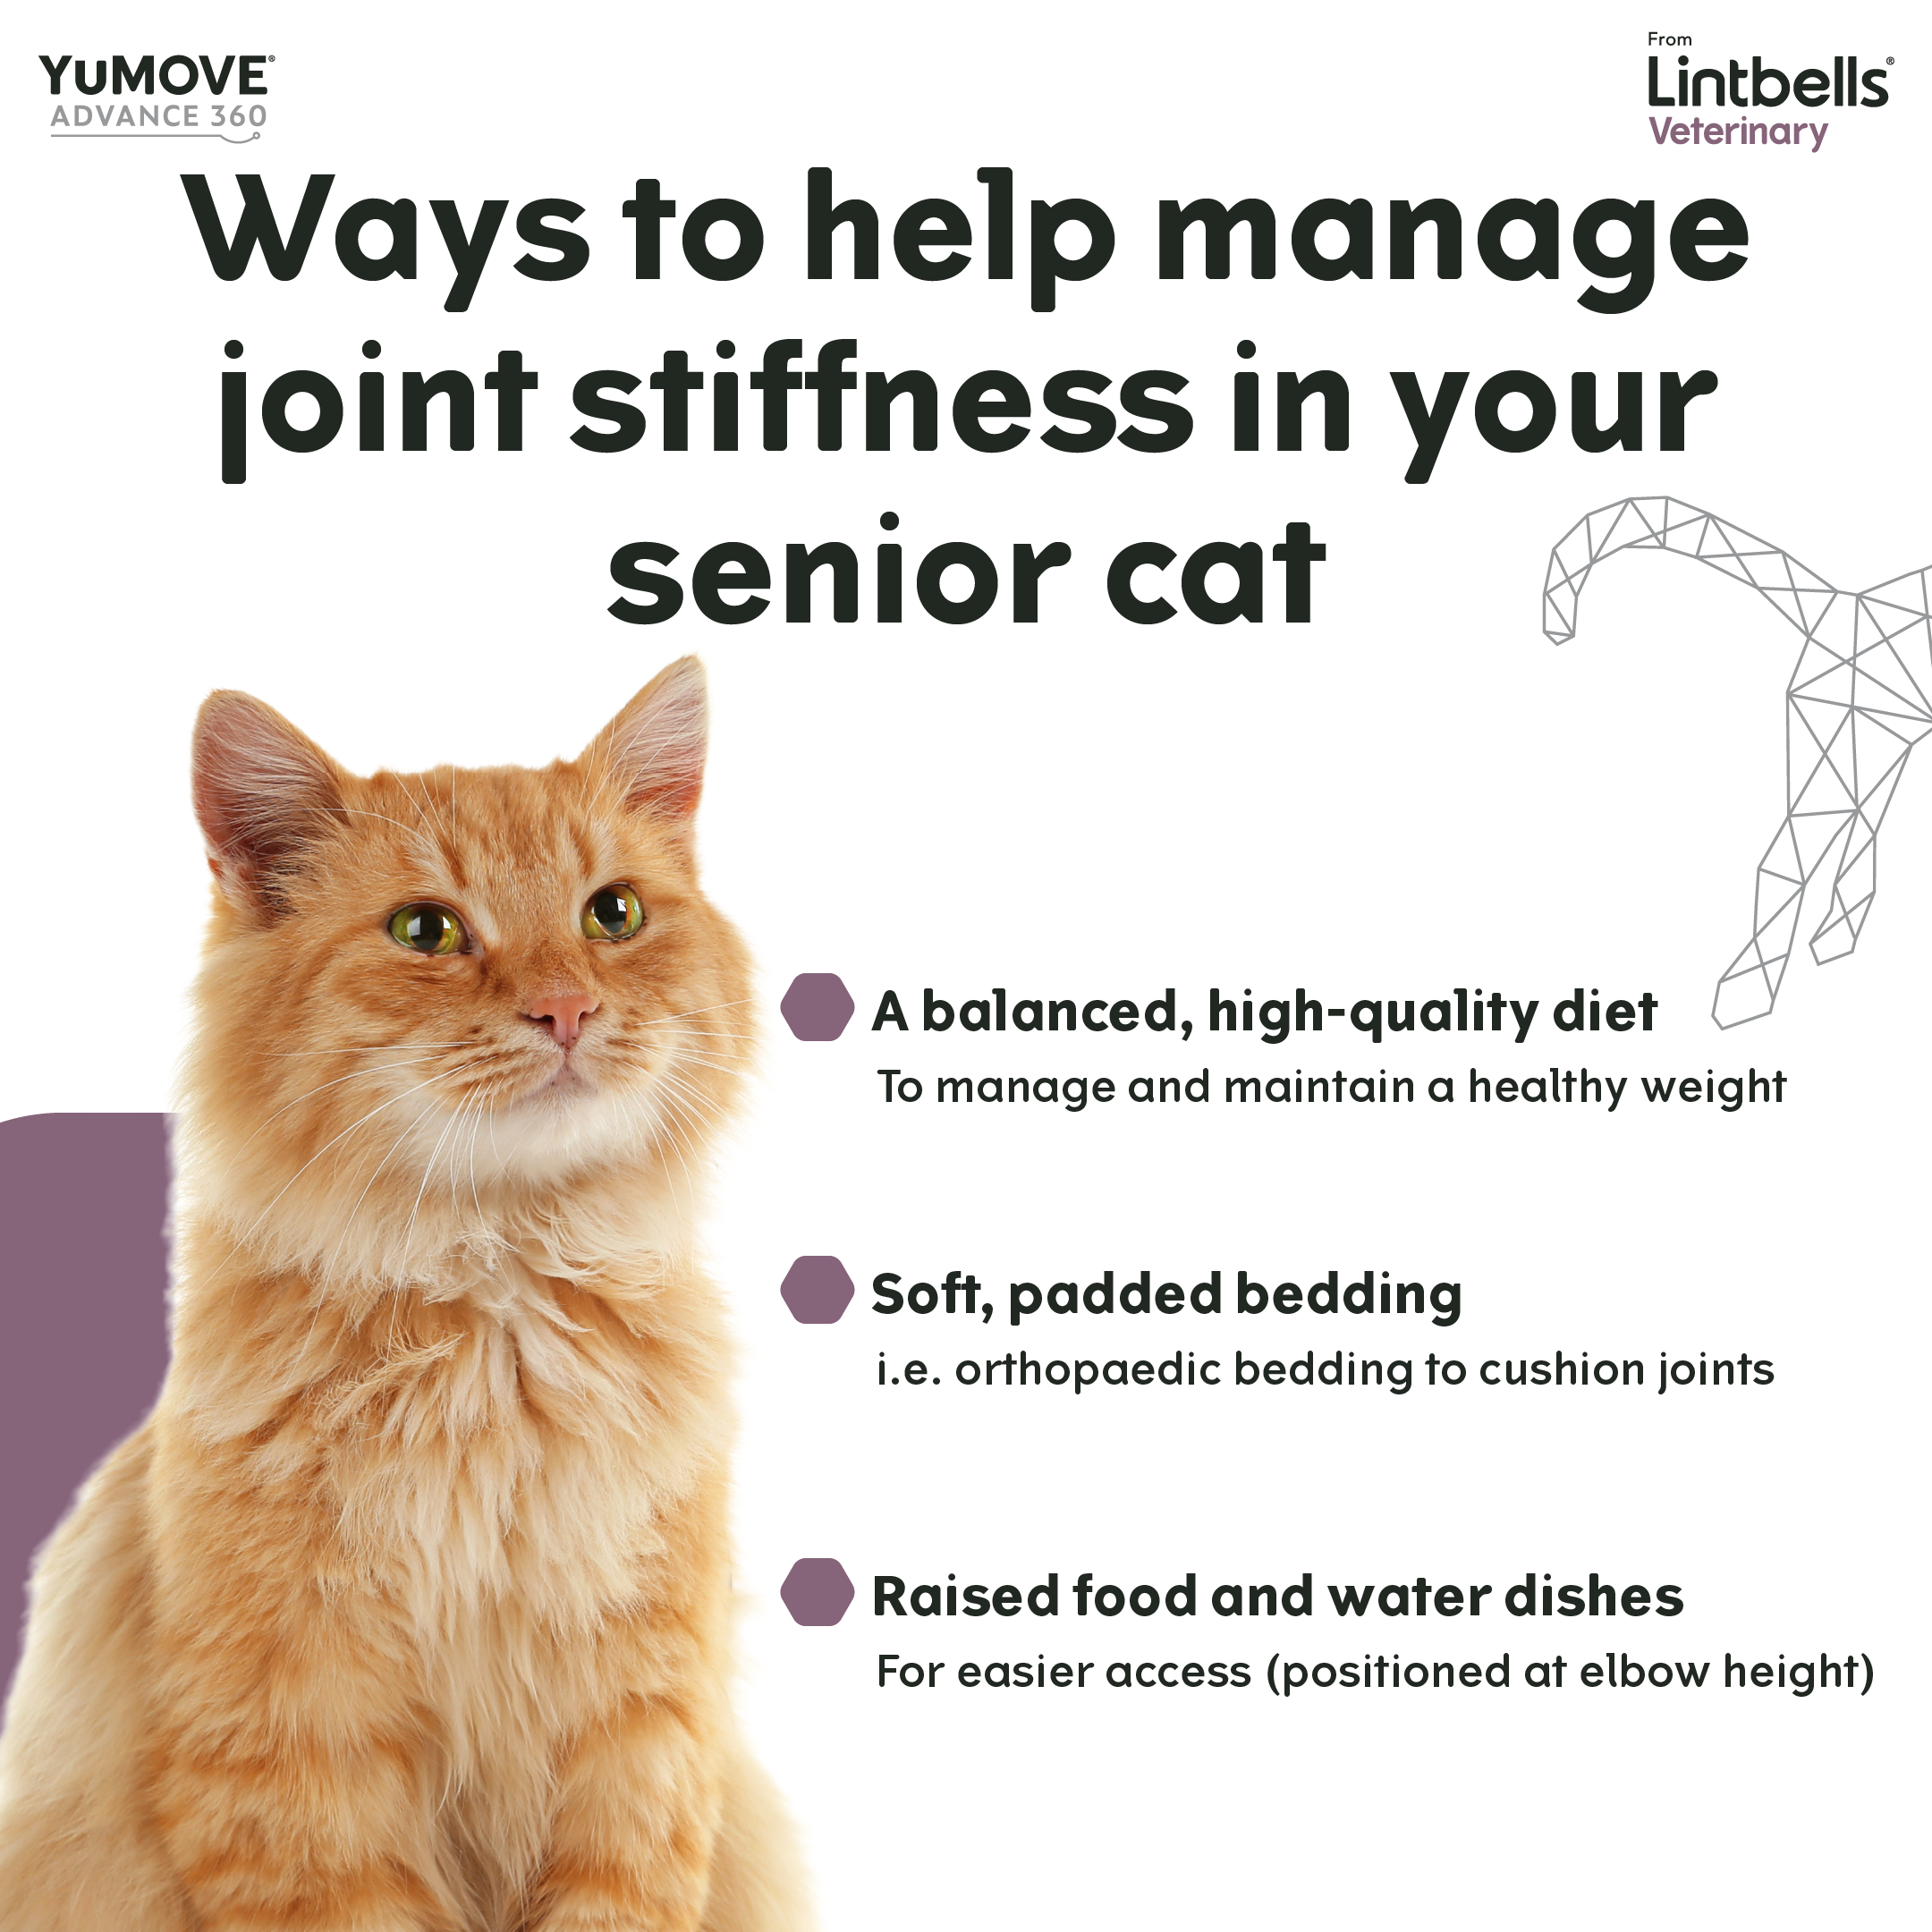  An infographic from Lintbells Veterinary on managing joint stiffness in senior cats. It suggests a balanced diet, soft bedding like orthopaedic cushions, and raised food and water dishes. Features an image of a ginger cat and a graphic of a cat’s joint structure.